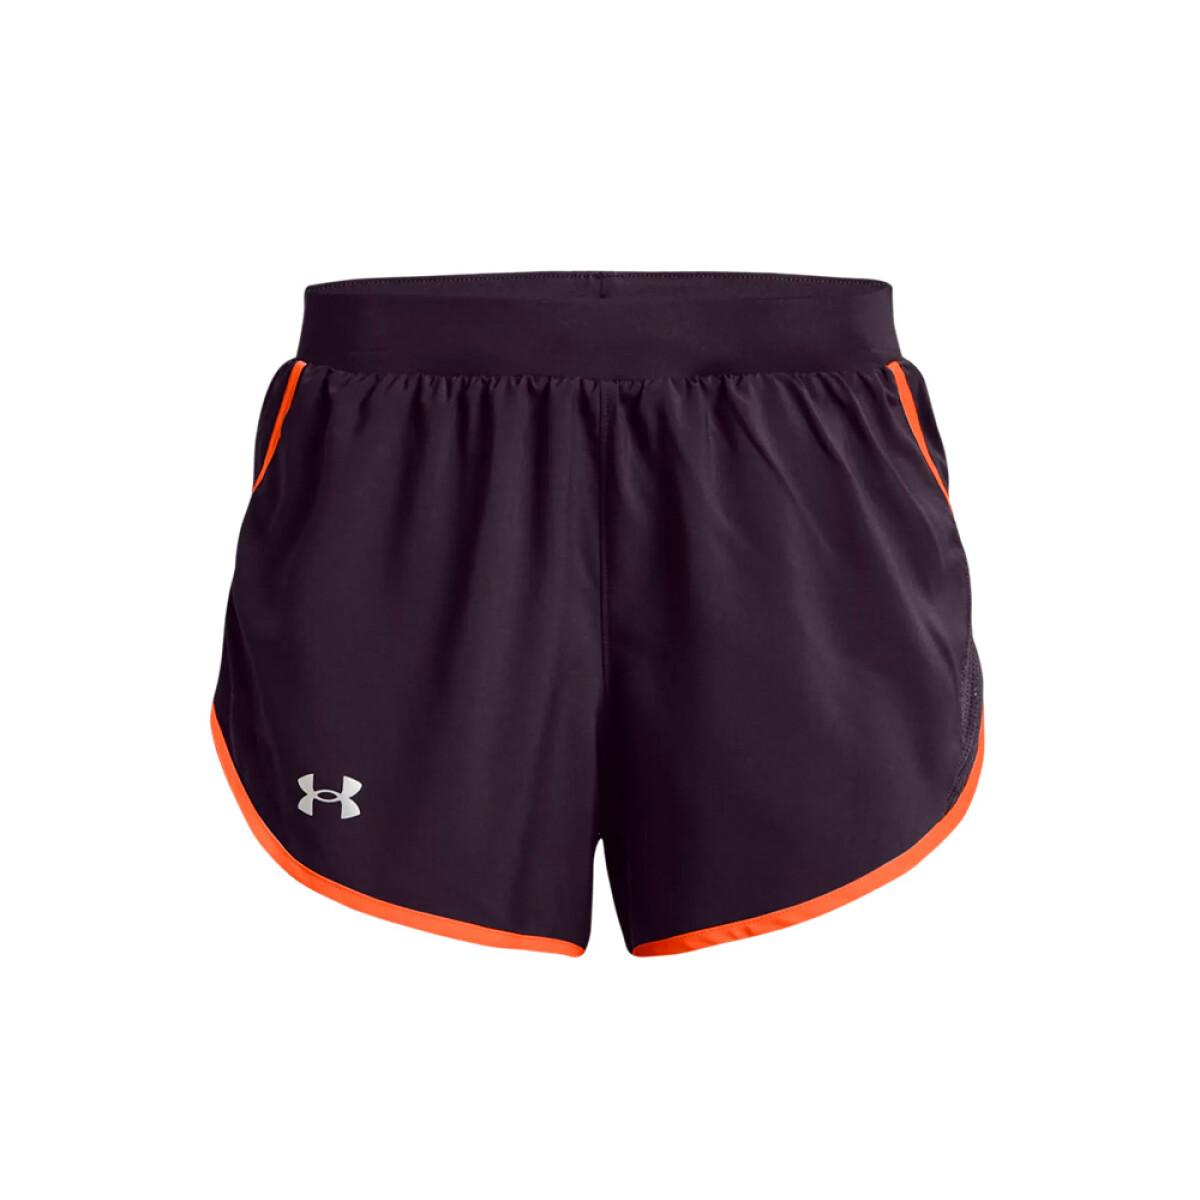 SHORT UNDER ARMOUR UA FLY BY 2.0 - 541 